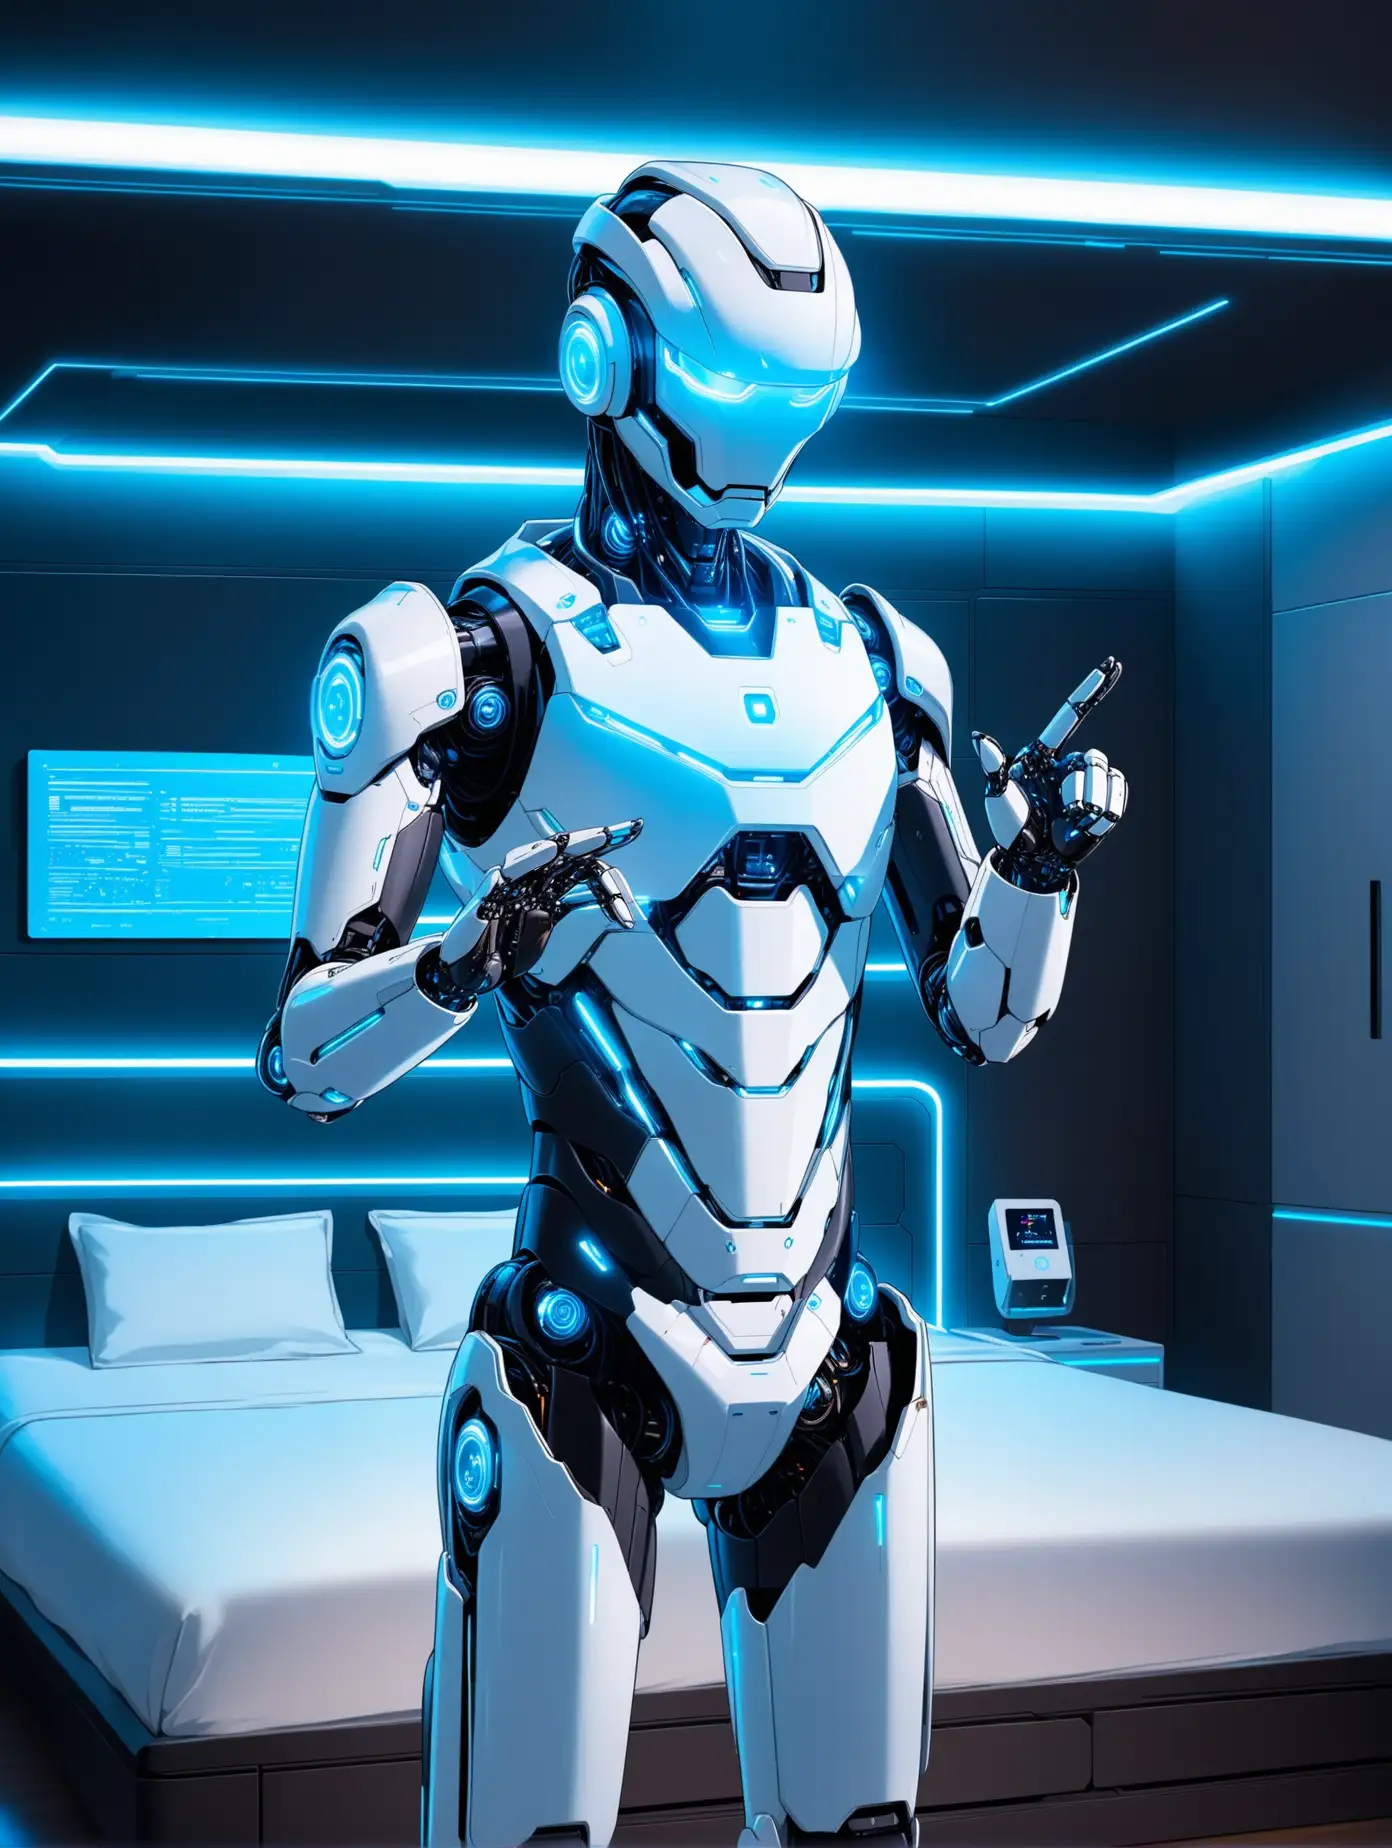 Futuristic AI Robot Demonstrating Builtin Functions in HighTech Bedroom